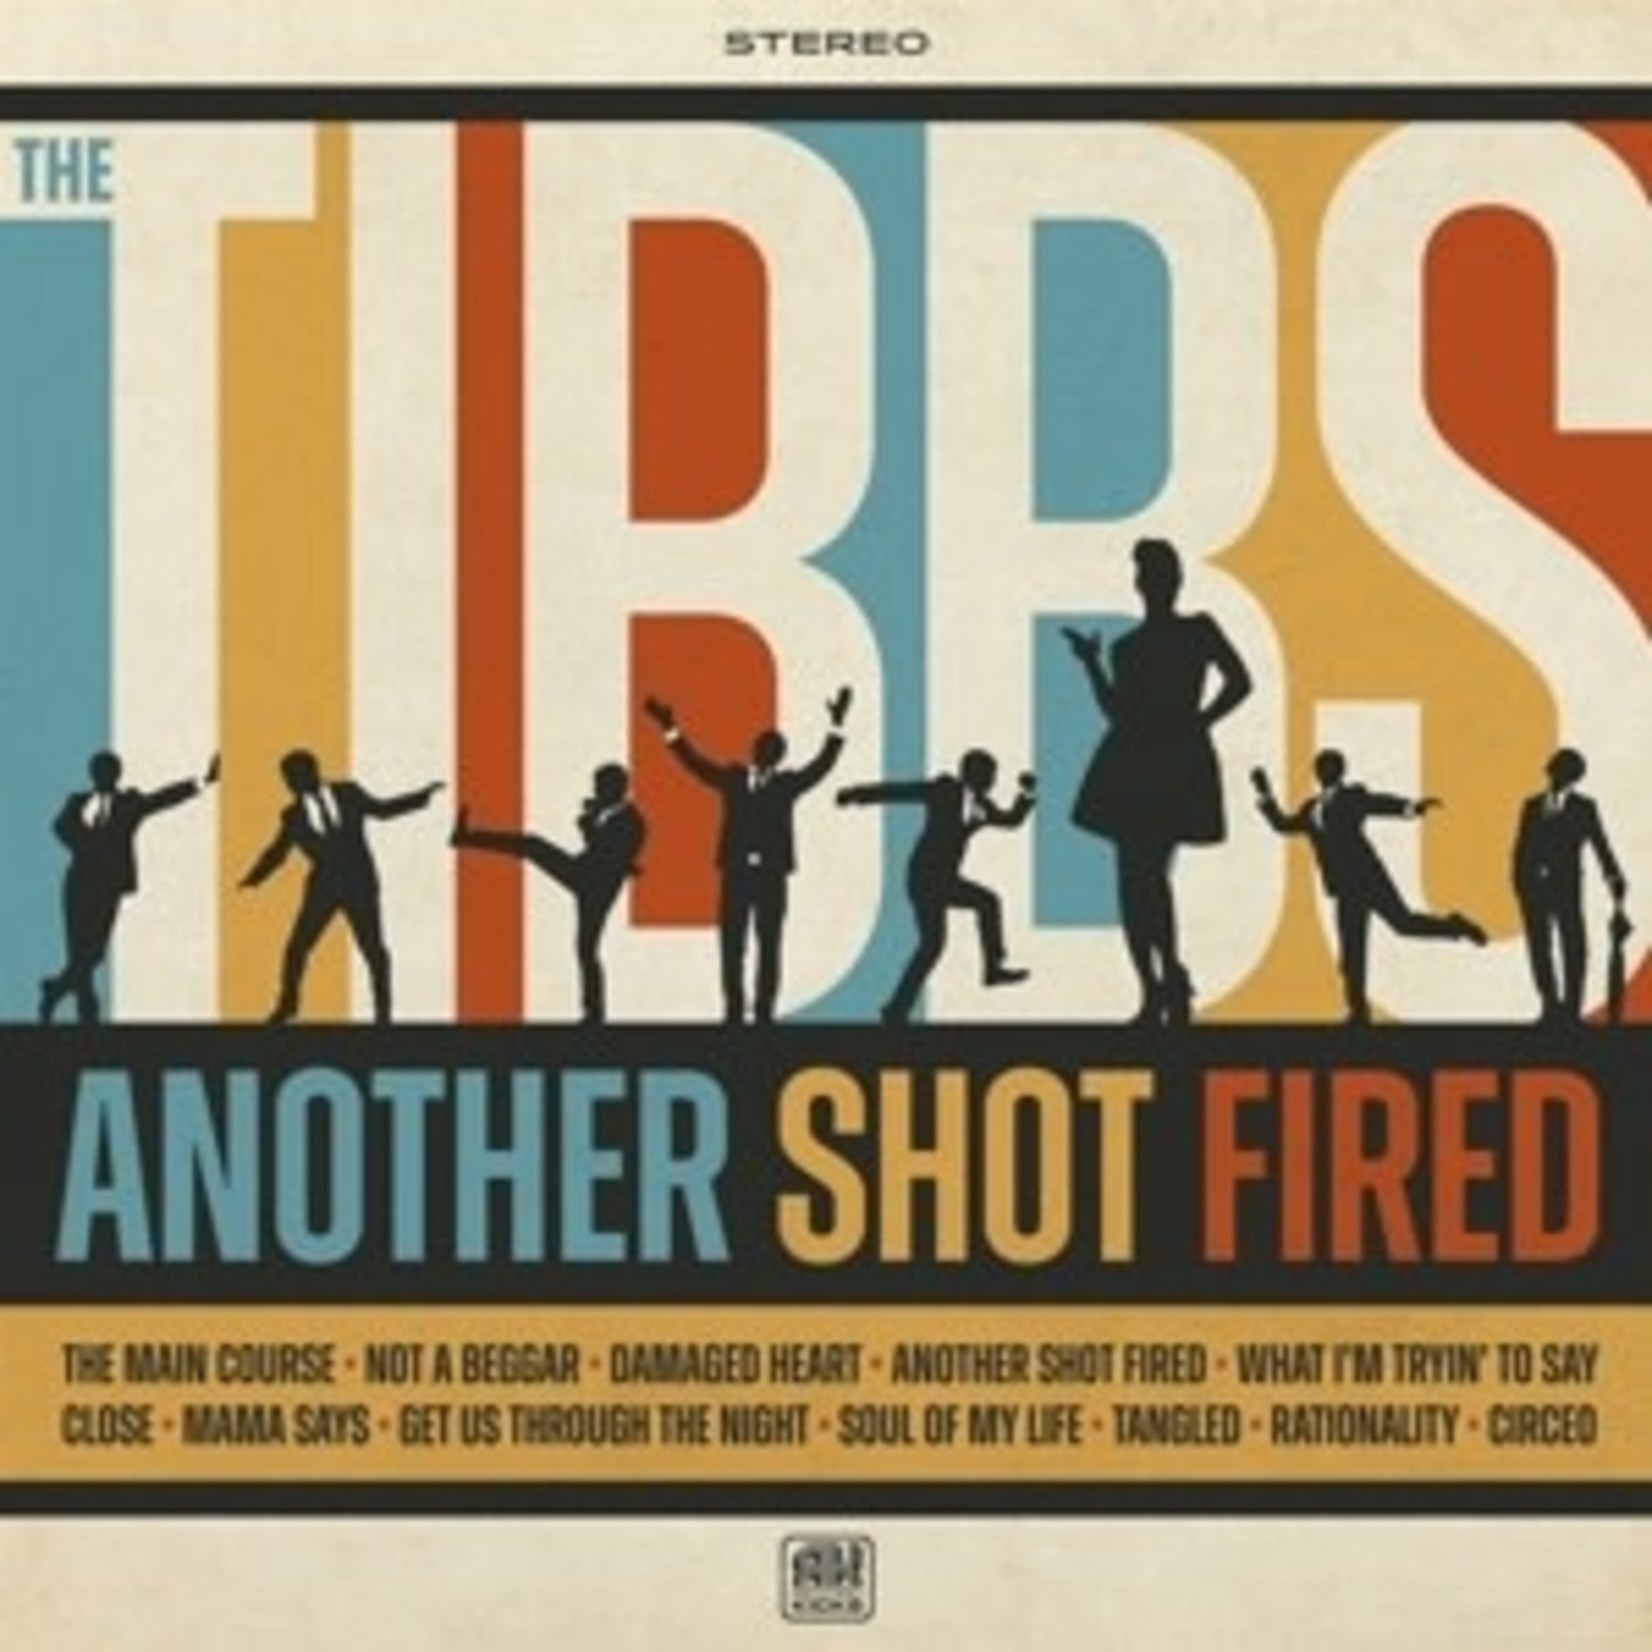 TIBBS_THE - ANOTHER SHOT FIRED  (CD)